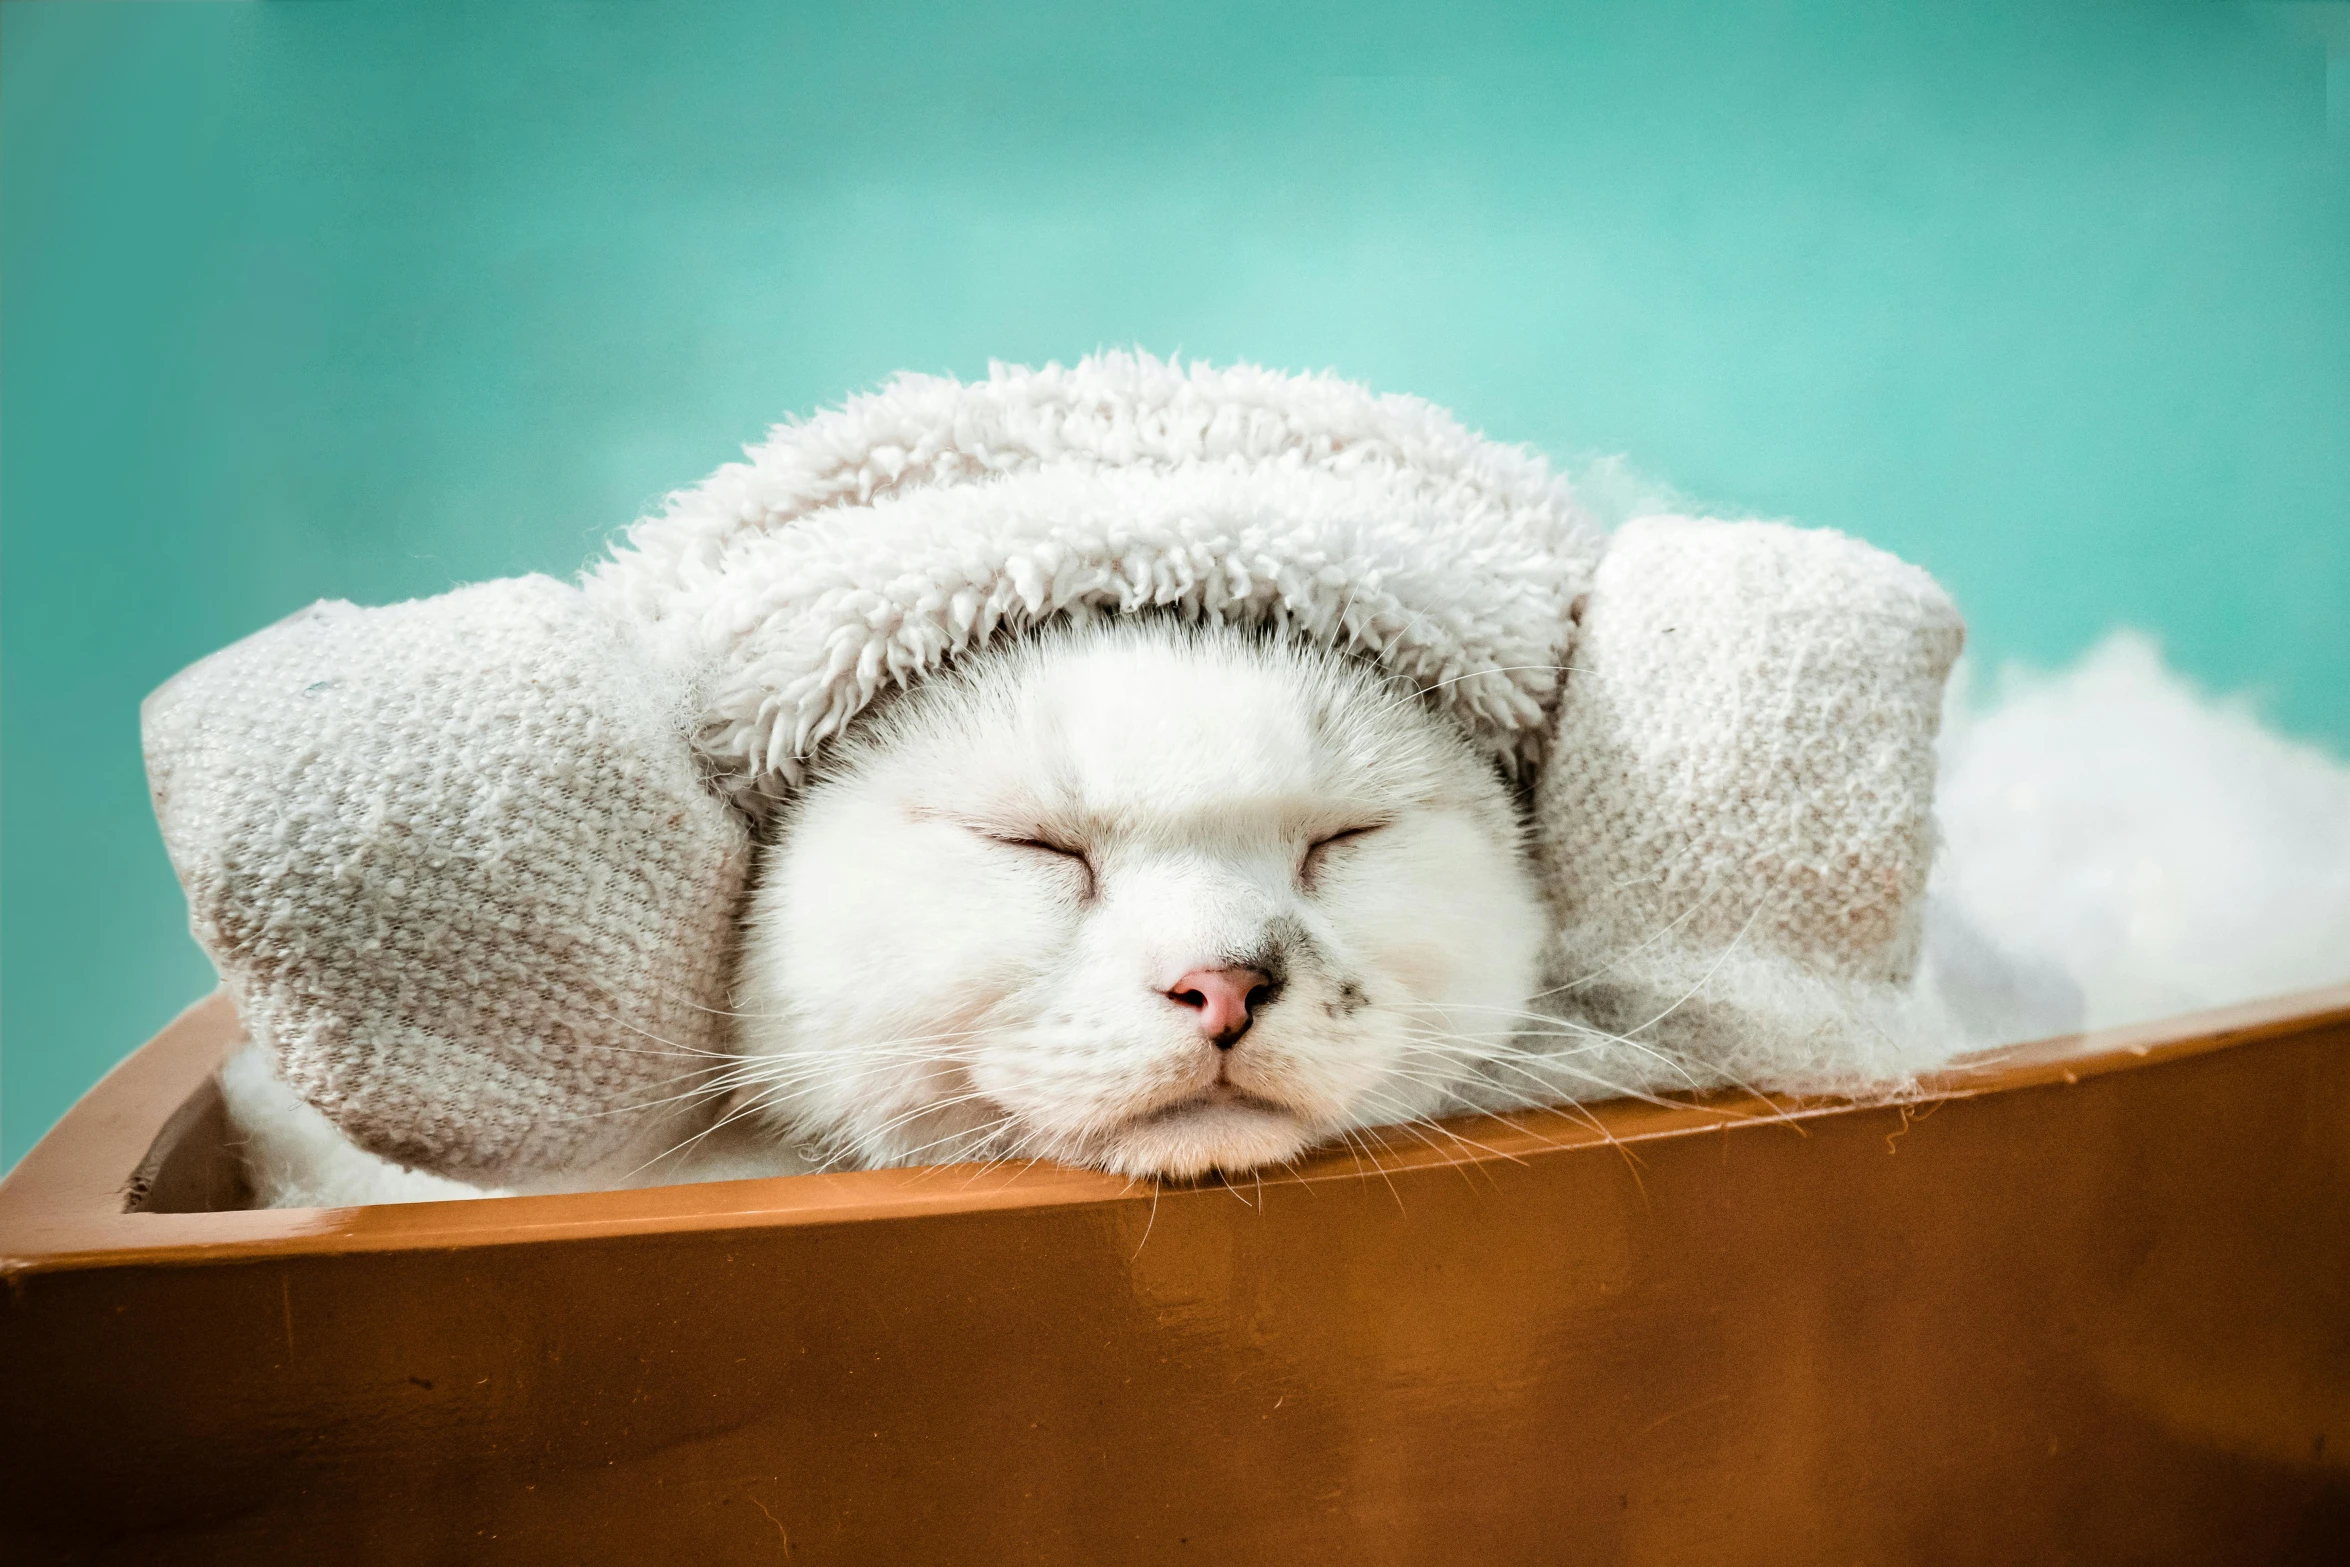 the white kitty is wearing warm clothing and sleeping